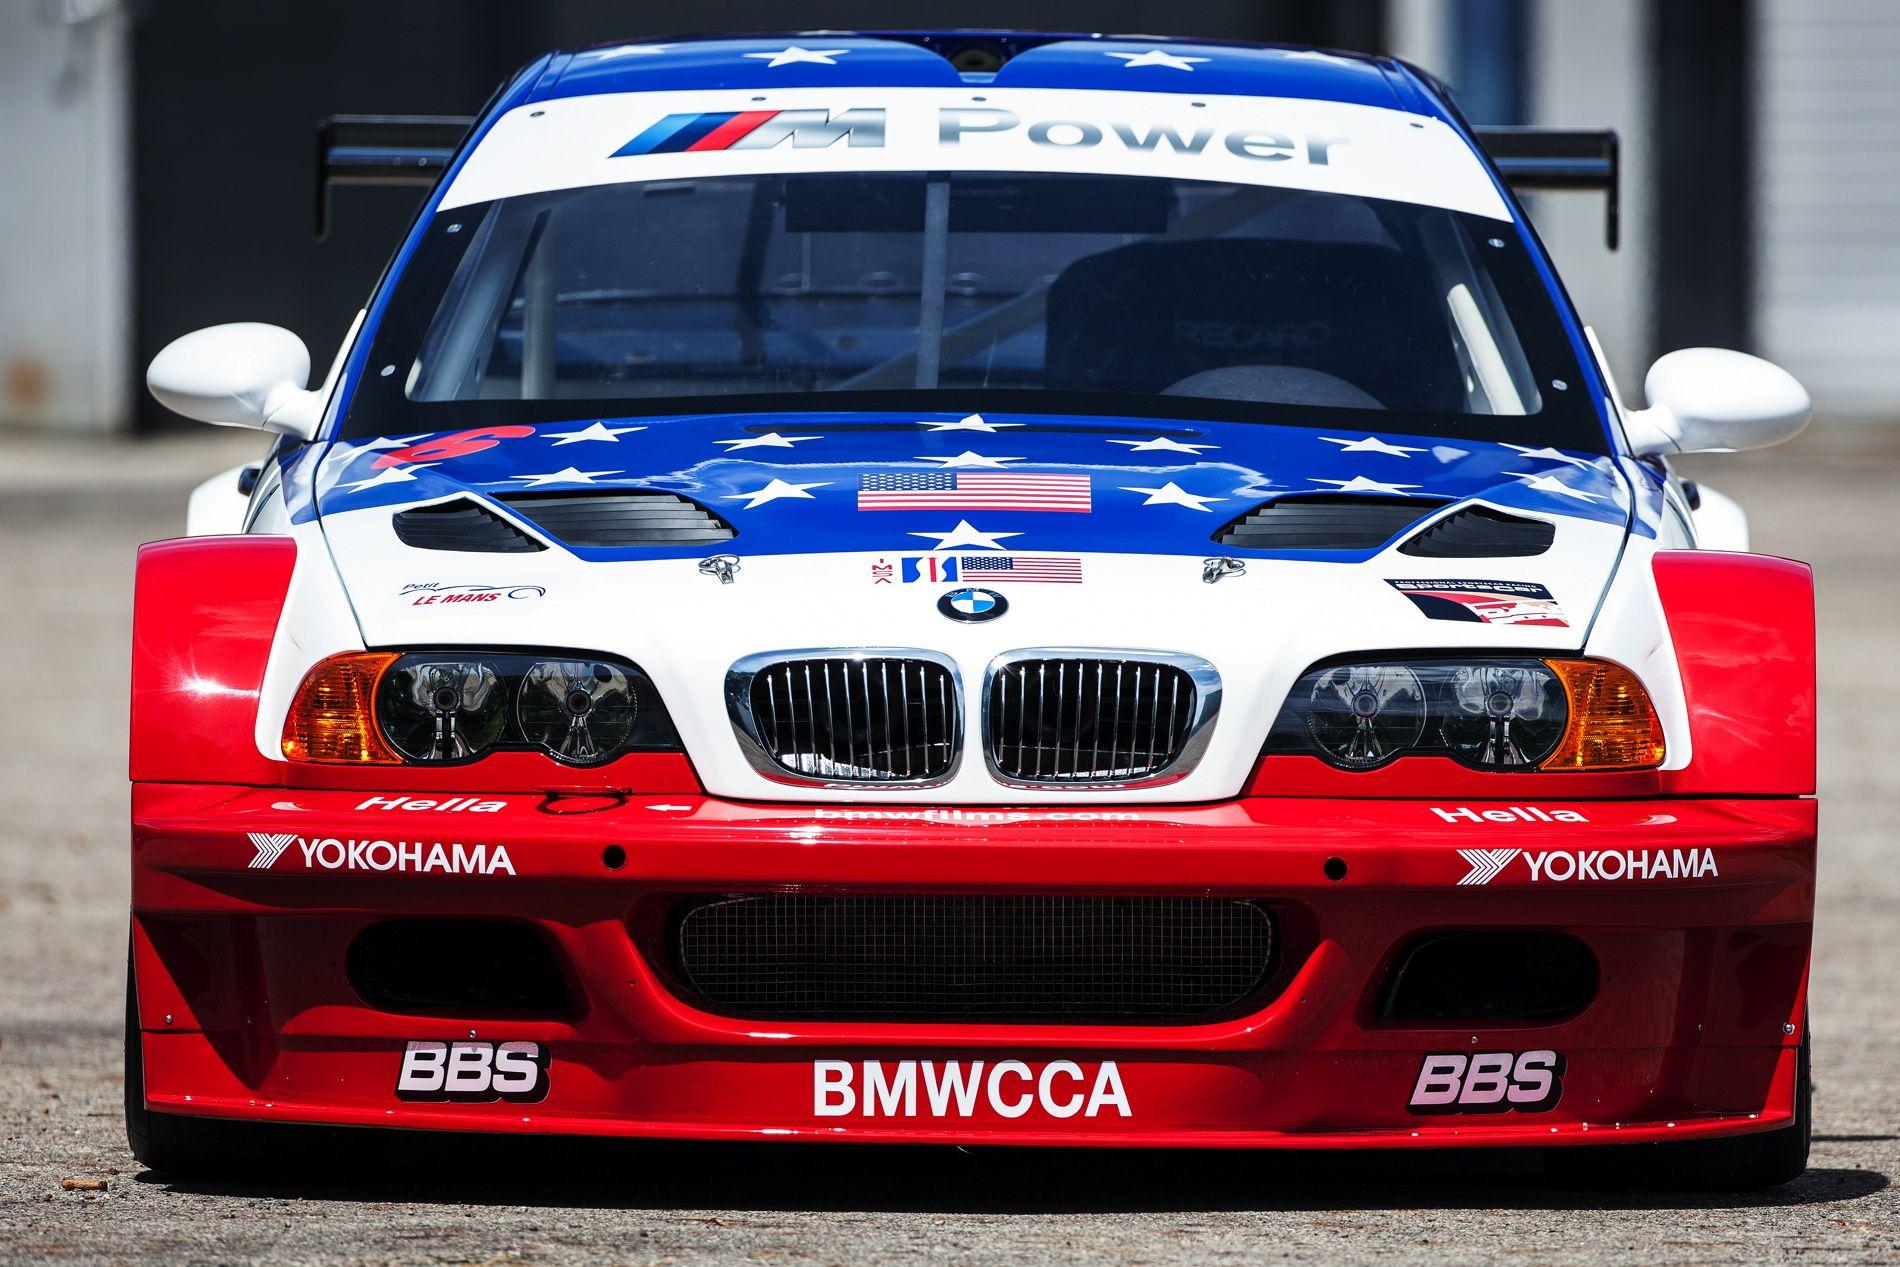 BMW M3 Racing Logo - BMW M3 GTR Race and Road Cars To Be Presented